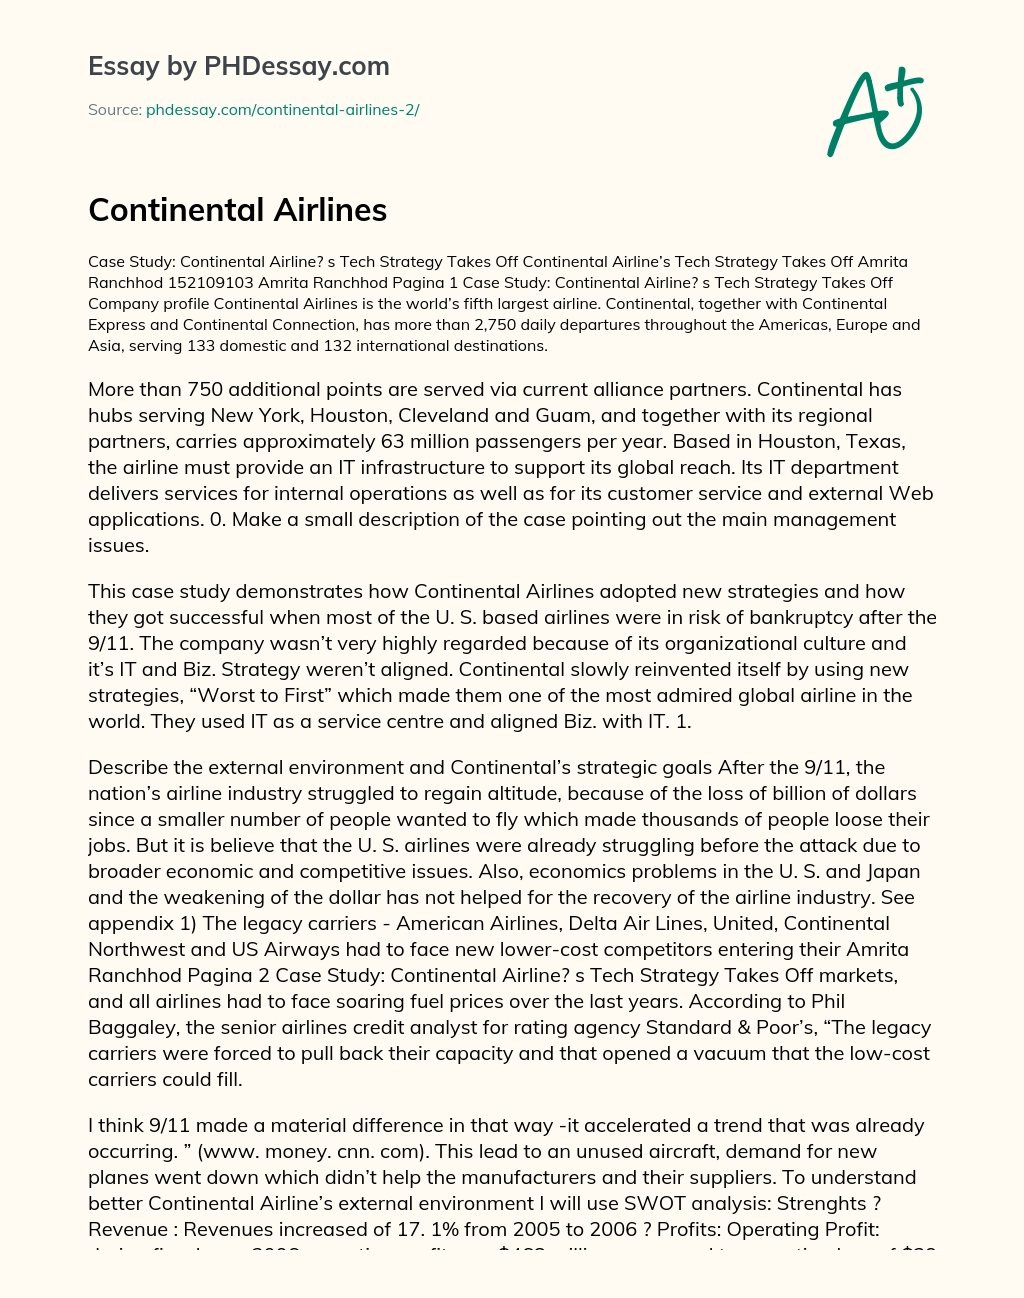 Continental Airlines essay